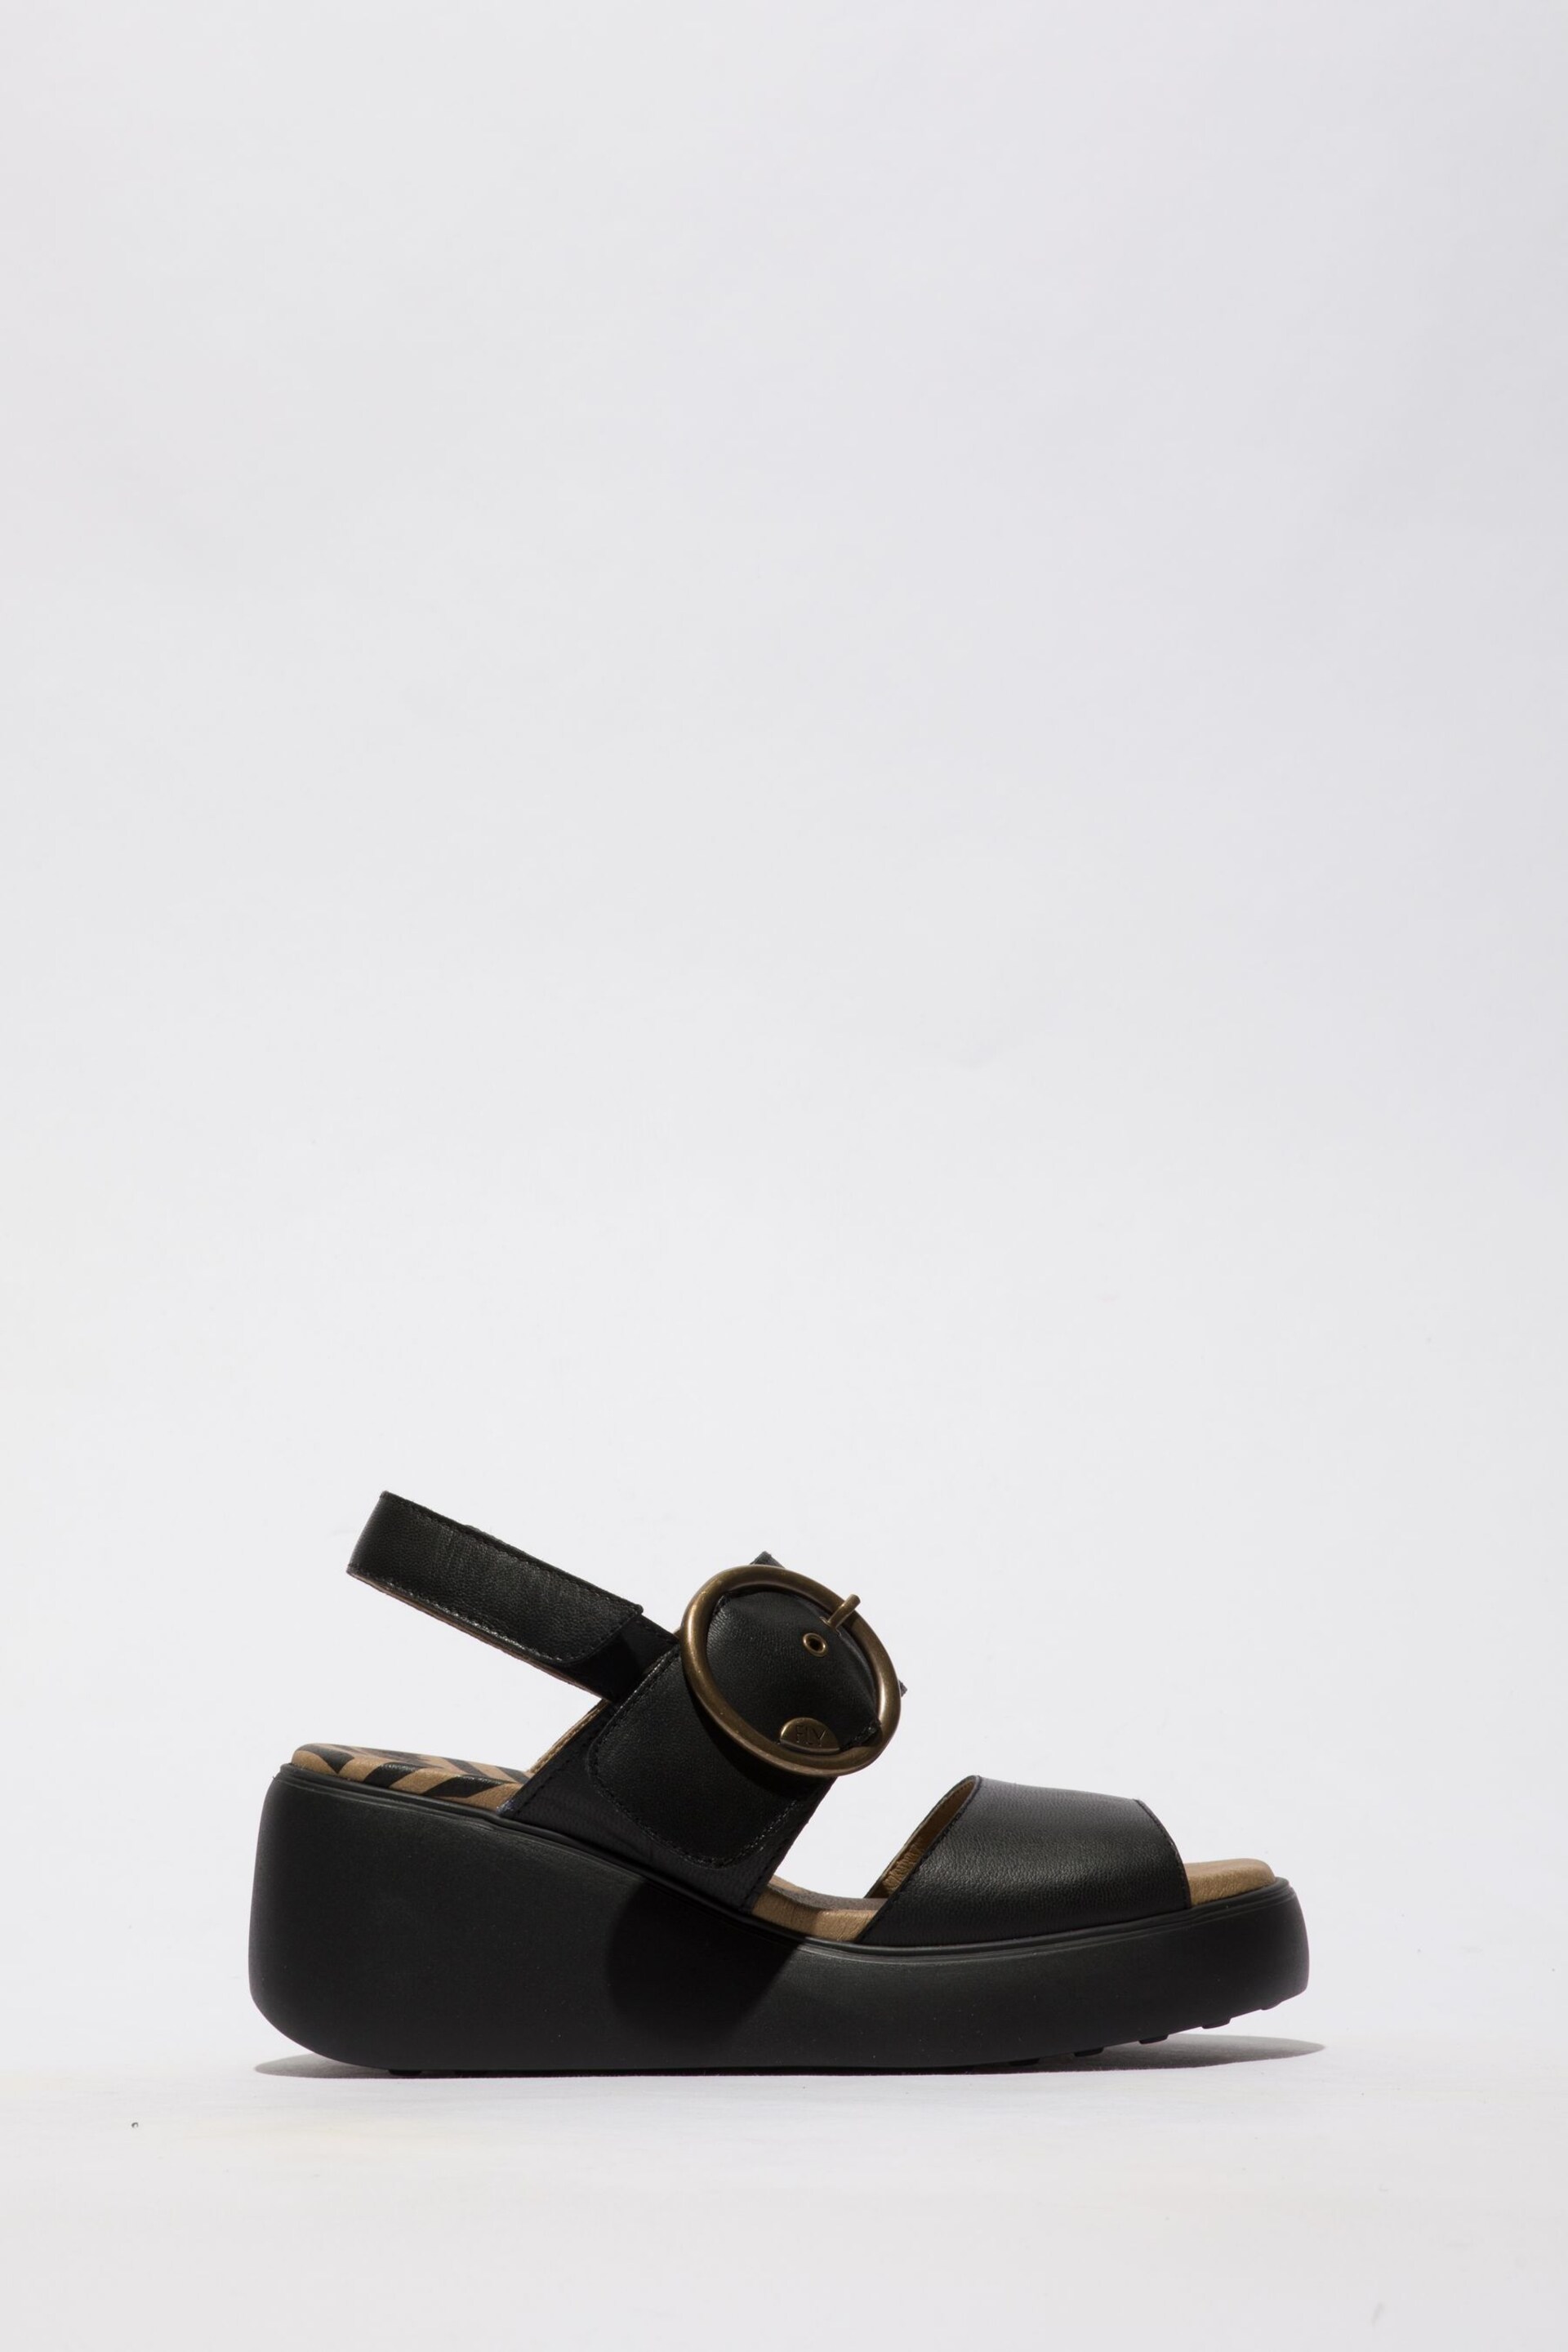 Fly London Digo Wedge Sandals - Image 1 of 4